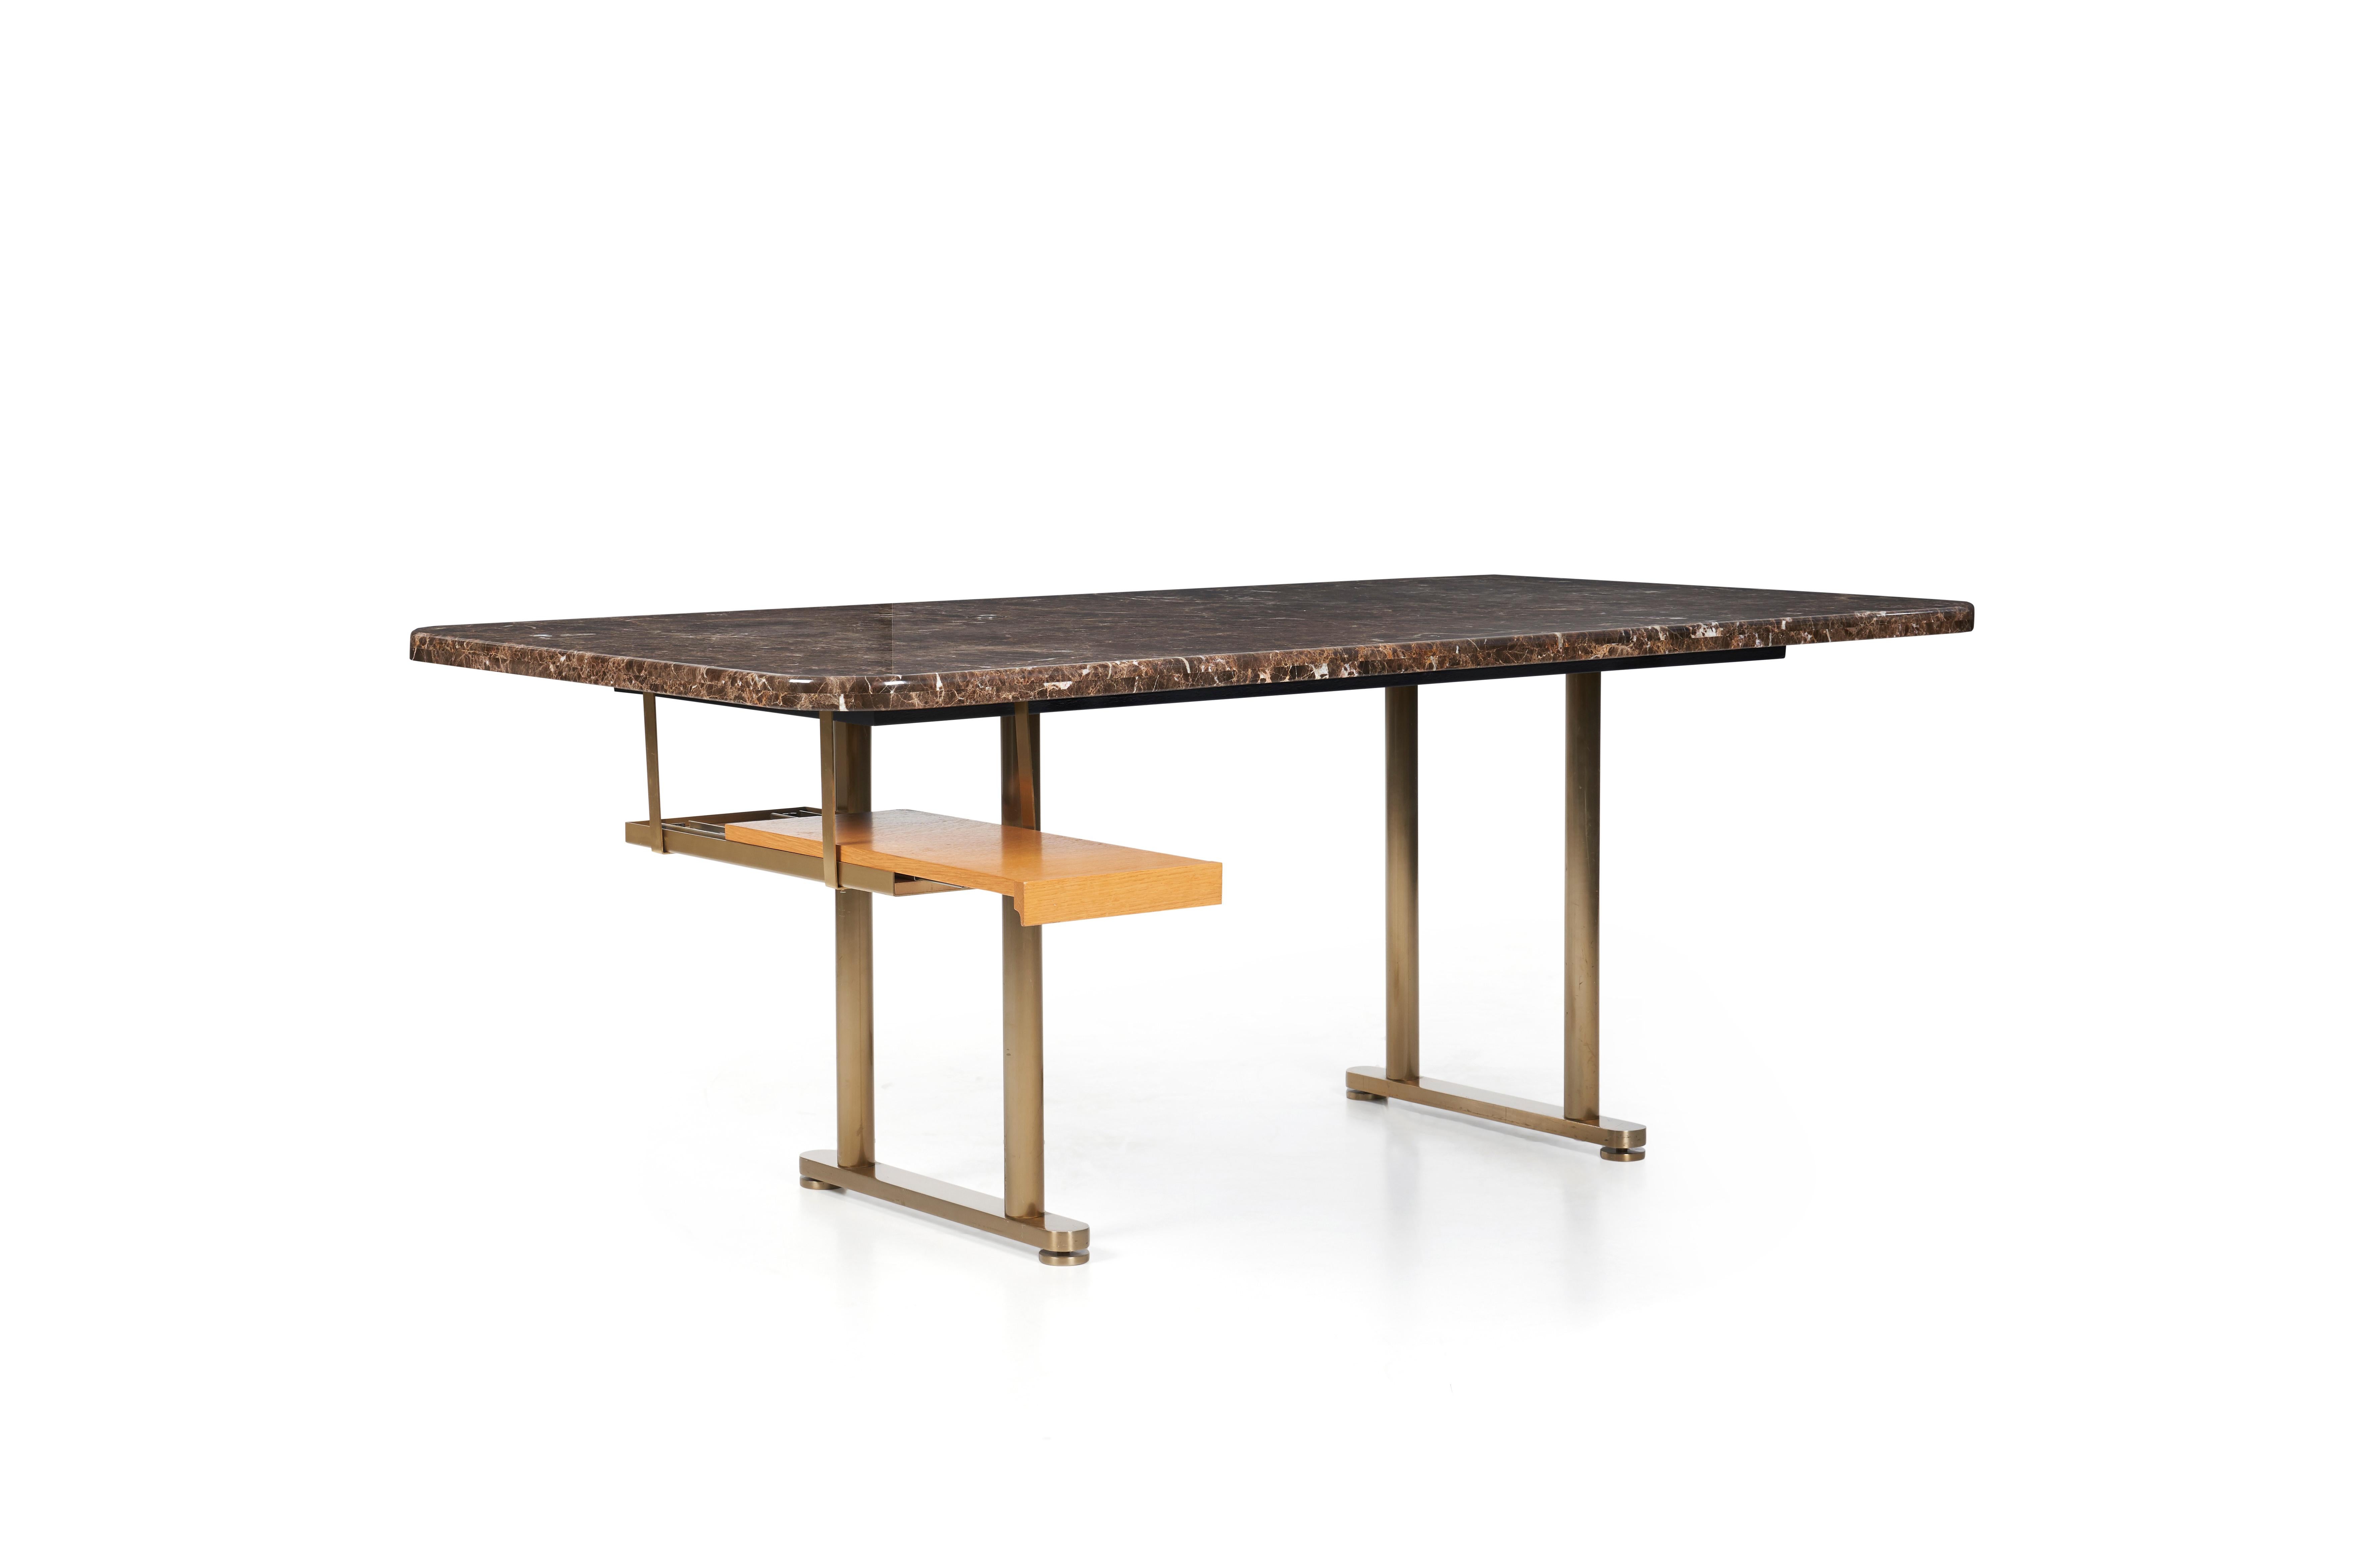 Zogrophos desk, slab of dark Emperador marble (brown with white veining).
Polished bronze uprights, legs have self leveling glides, with combed oak suspended pullout shelf.
 